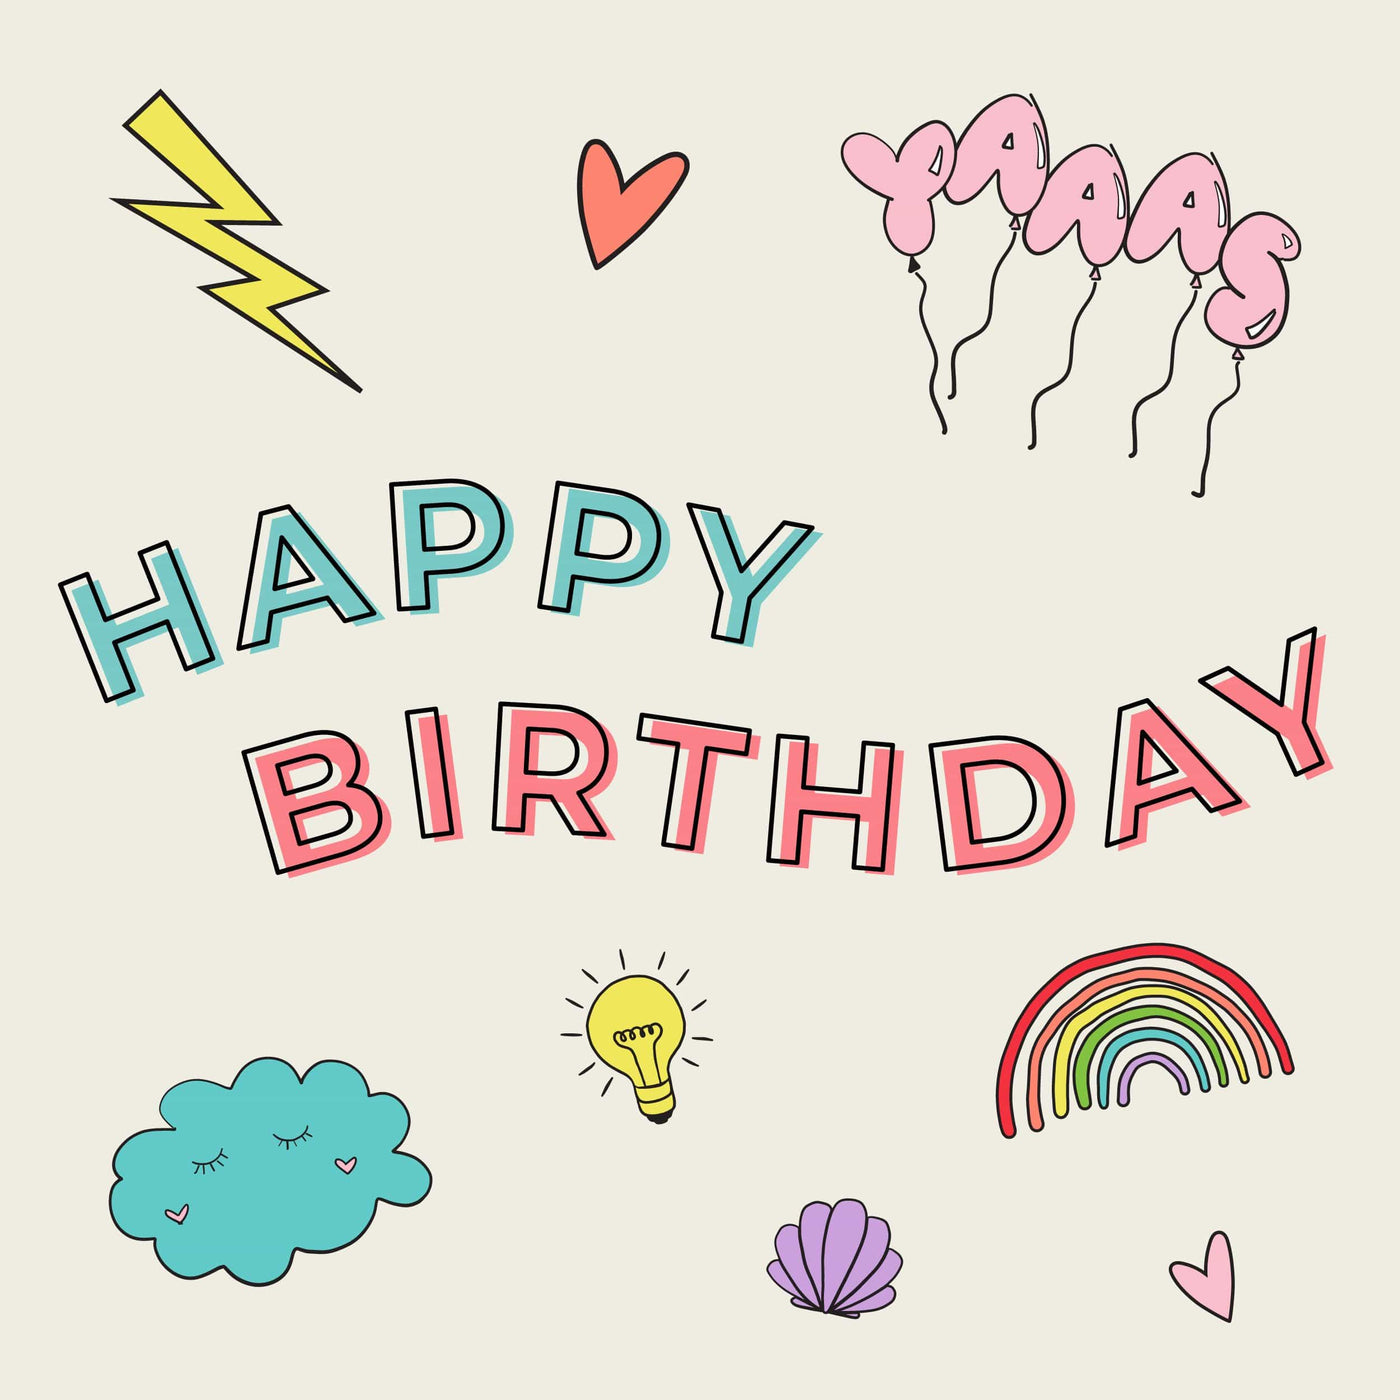 Happy Birthday gift card with cute icons white background and blue and pink lettering